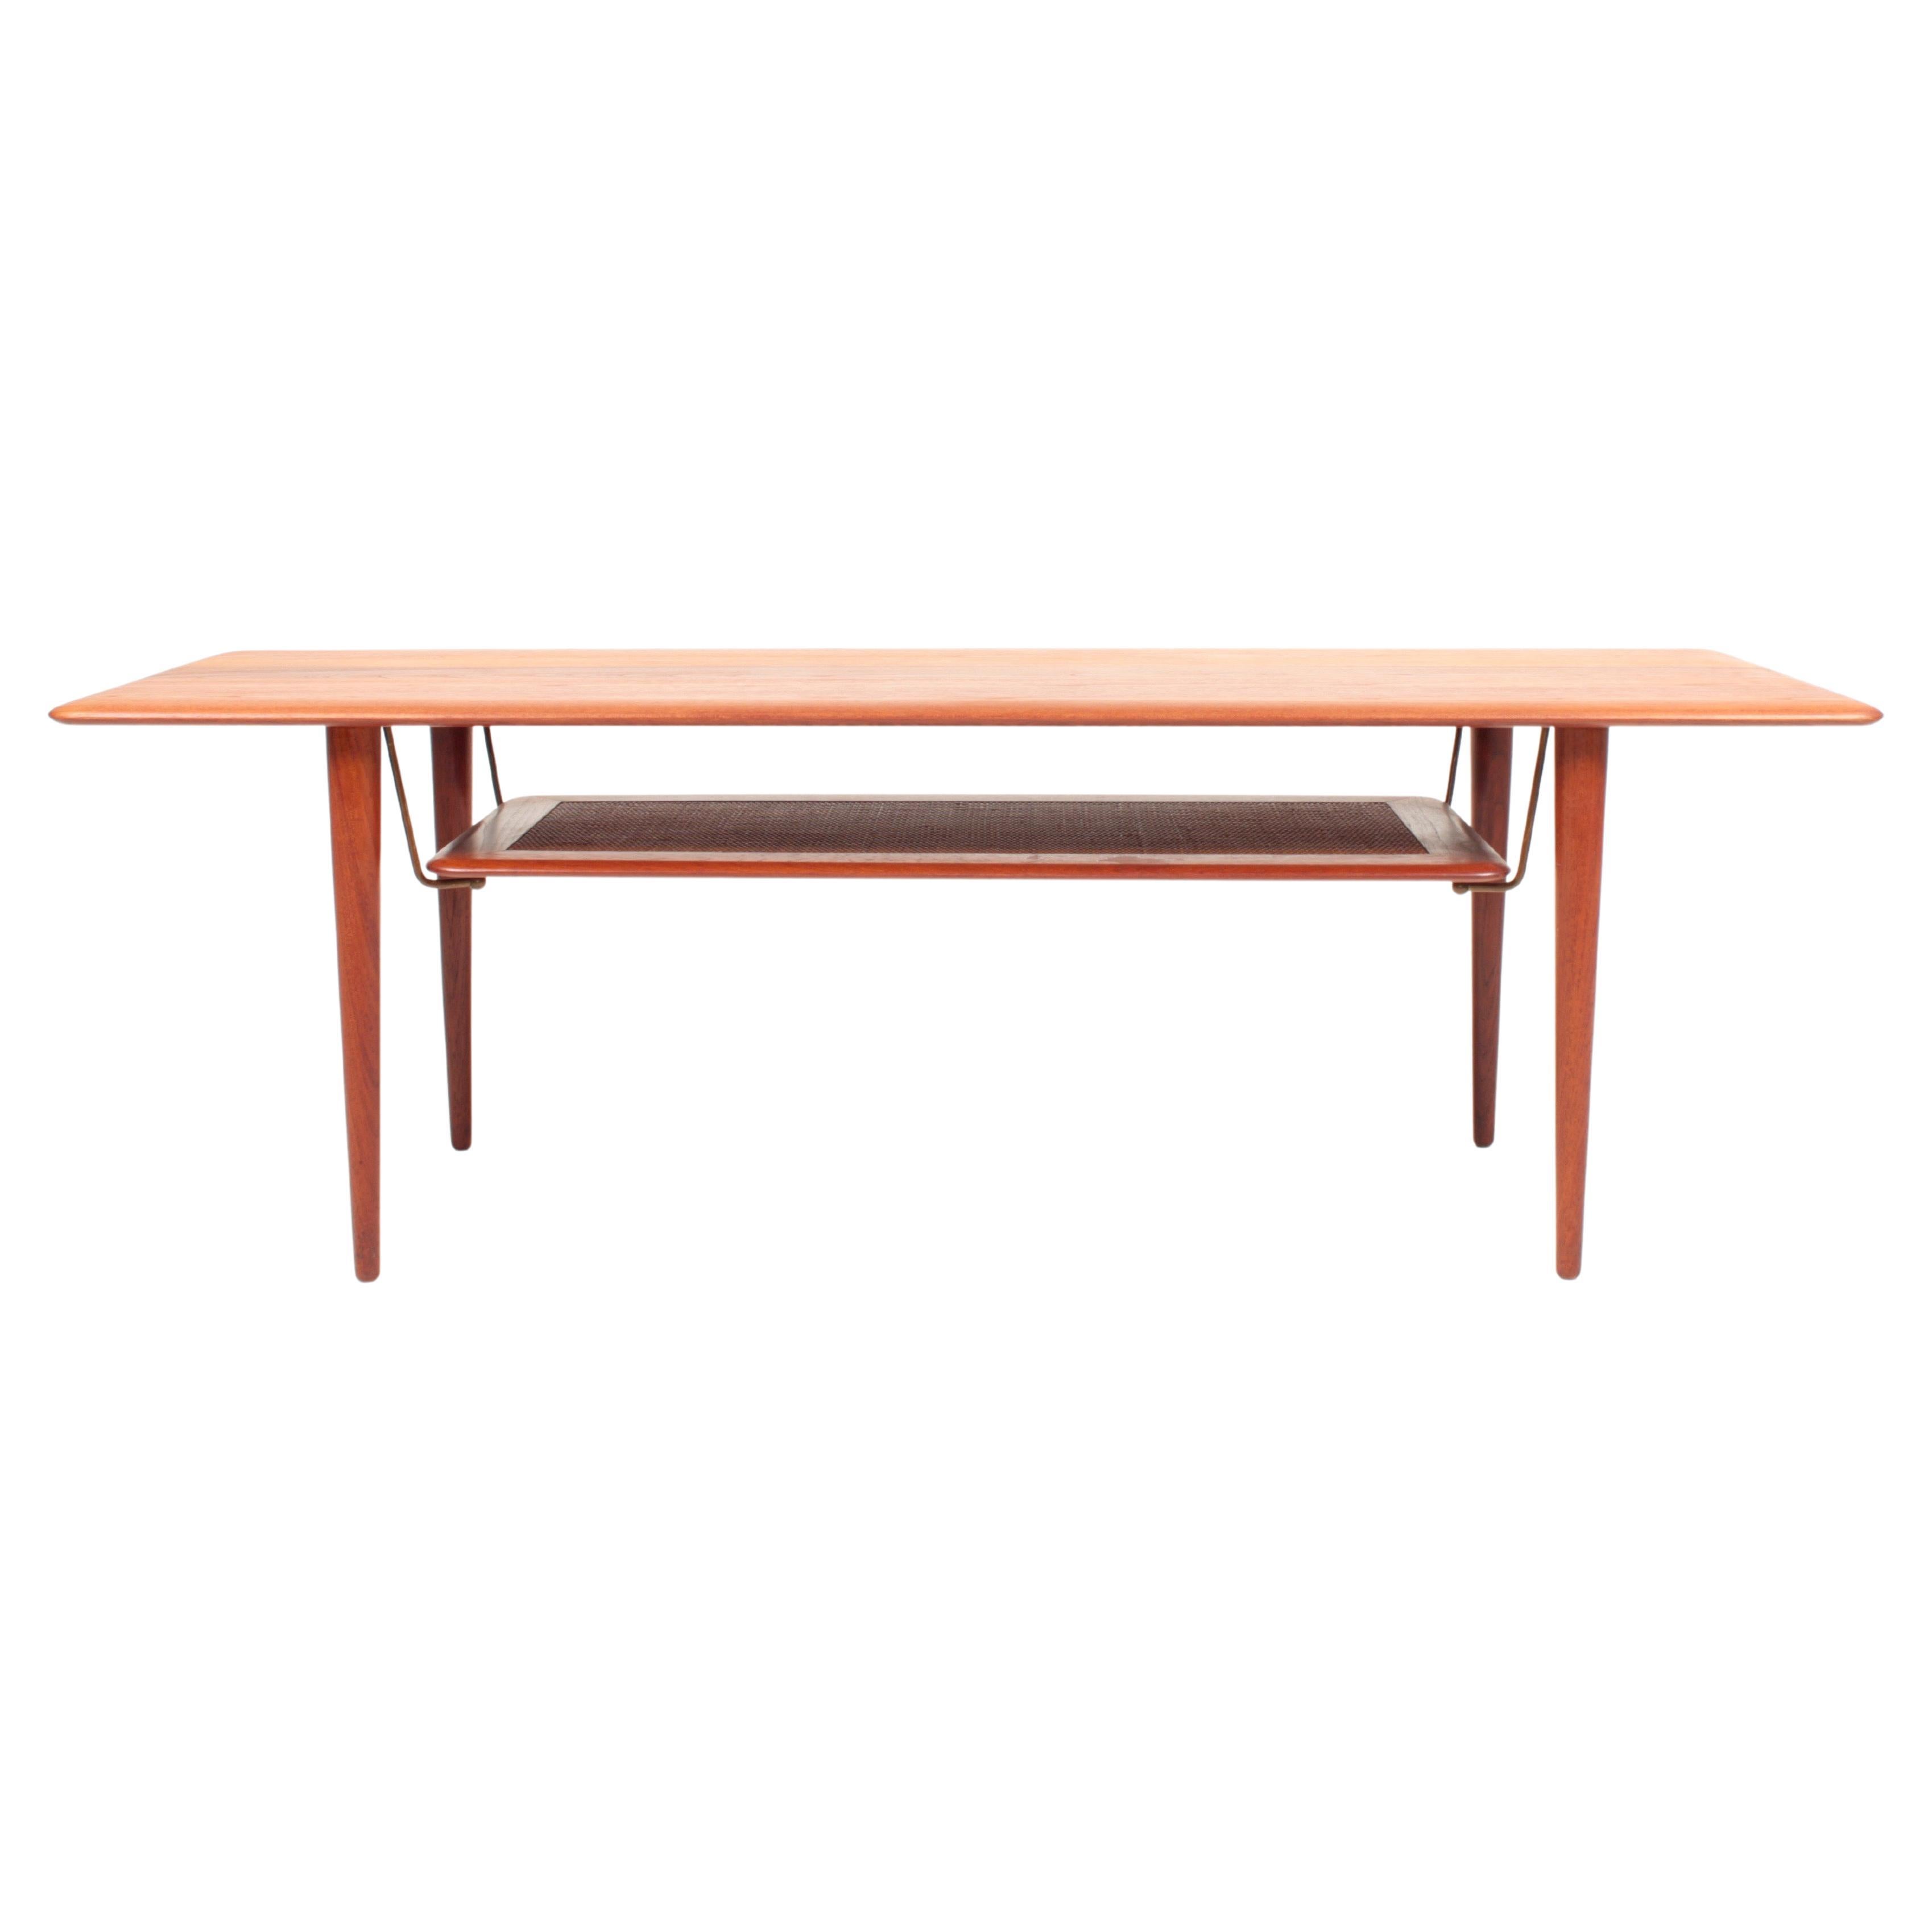 Midcentury Low Table in Solid Teak and Cane by Hvidt & Mølgaard, Made in Denmark